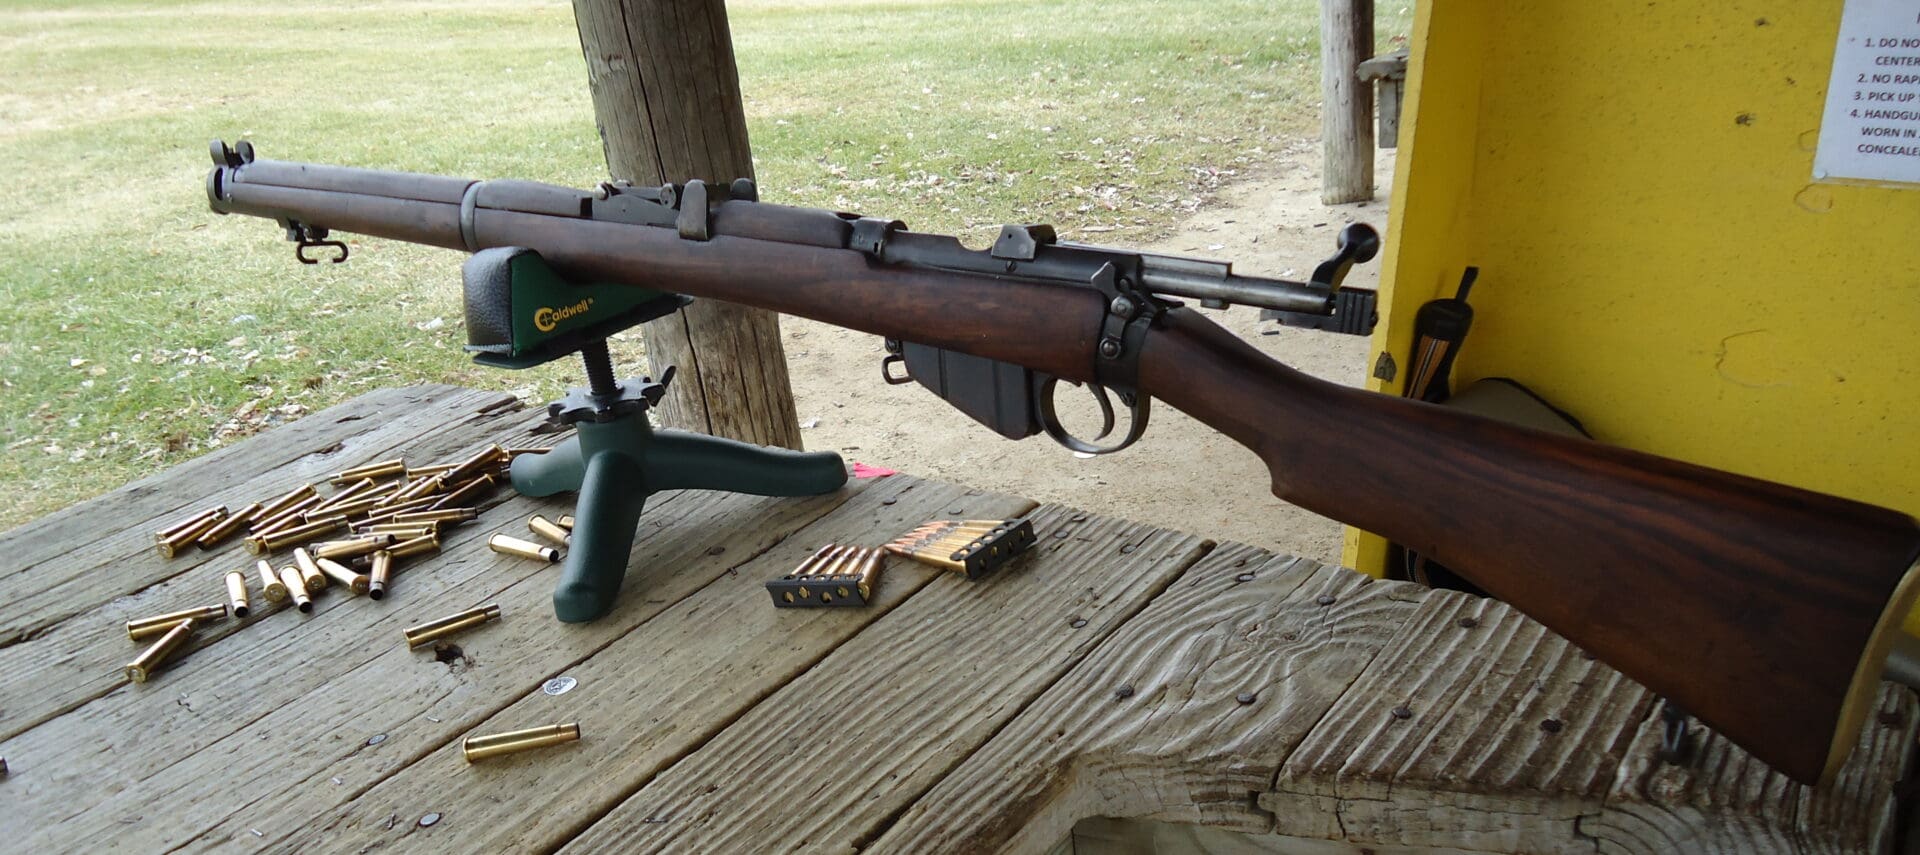 SMLE LEE ENFIELD   No4  STOCK SAFETY SPRING